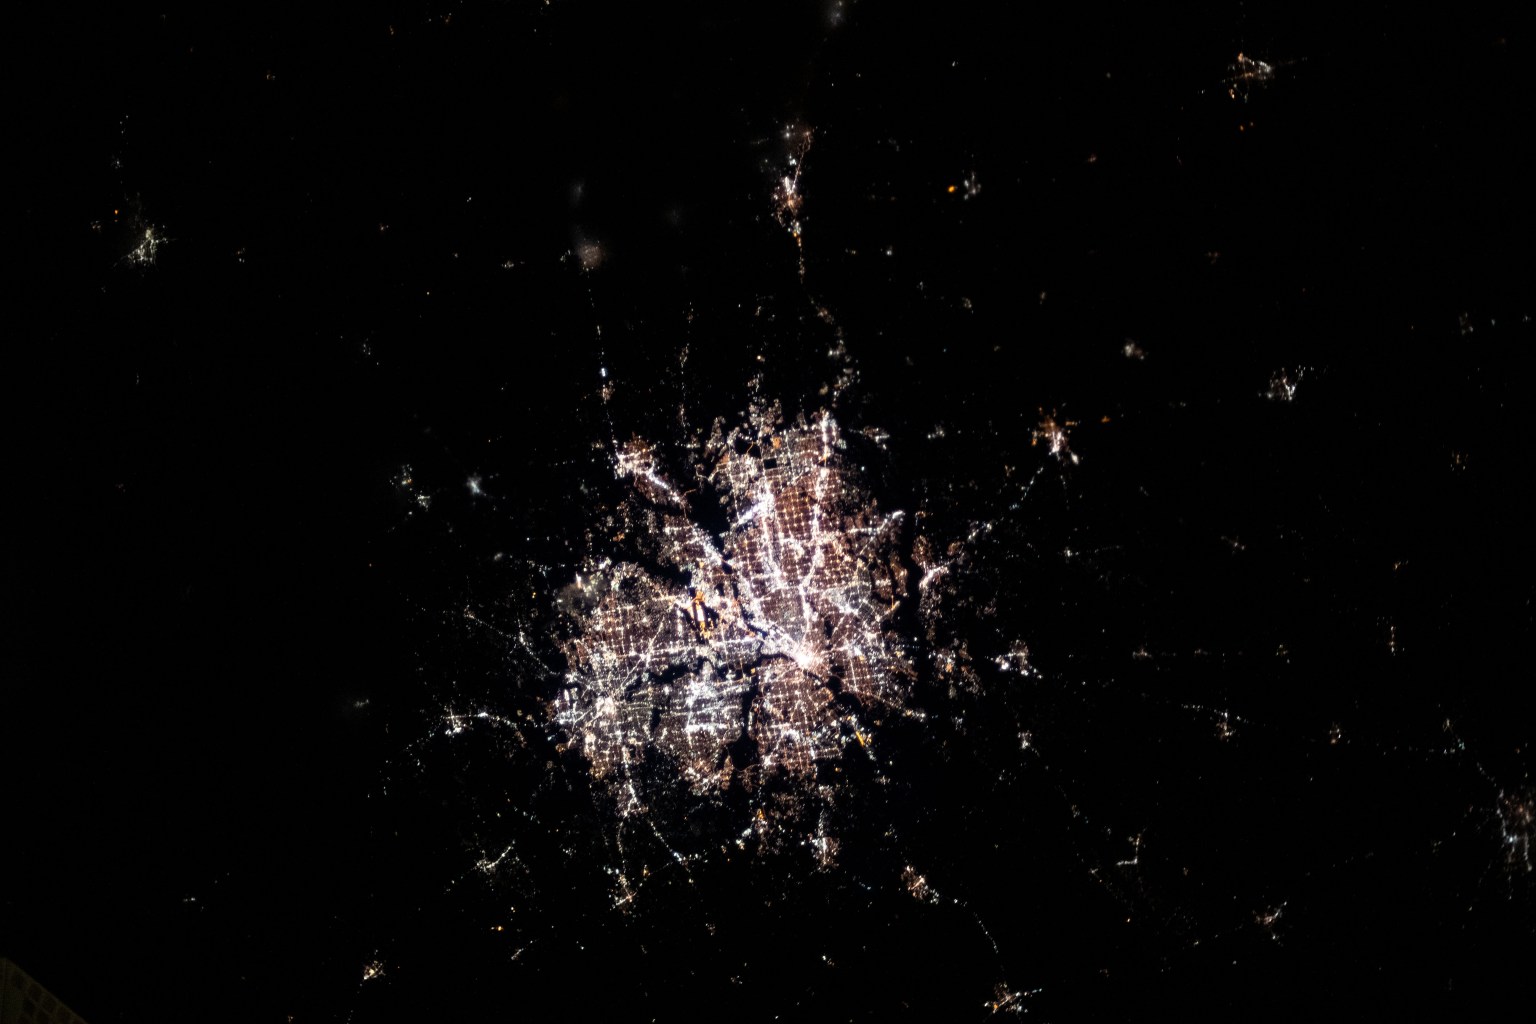 The International Space Station was orbiting 260 miles above central Texas when this nighttime photograph was taken of the Dallas-Fort Worth metropolitan area.